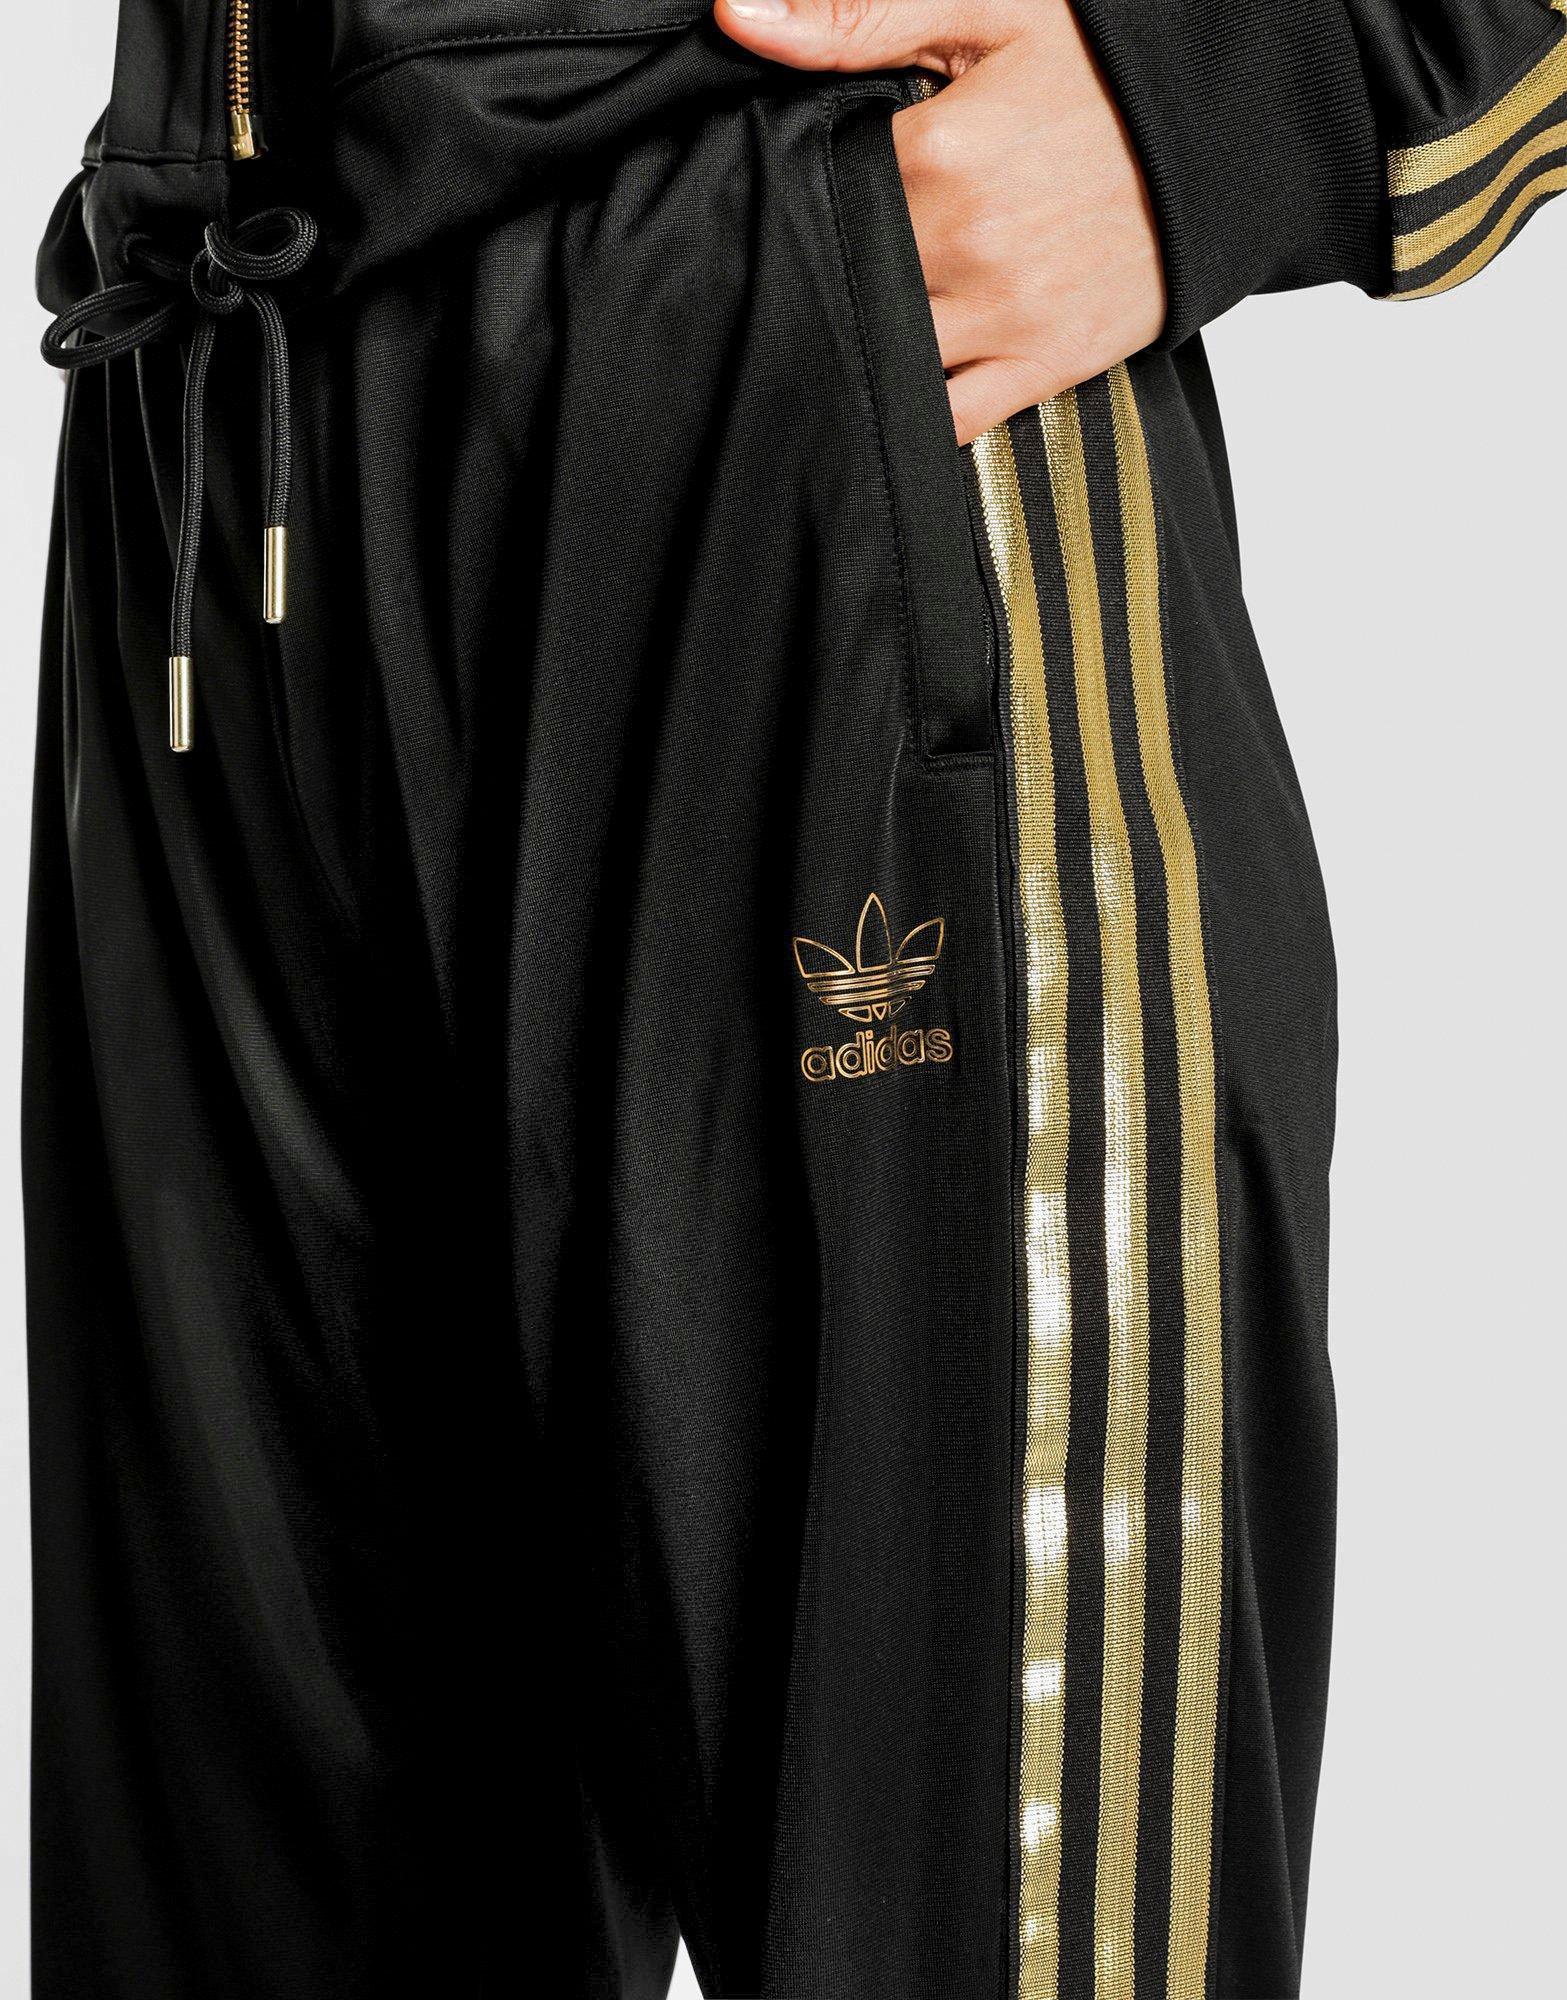 black and gold adidas jogging suit